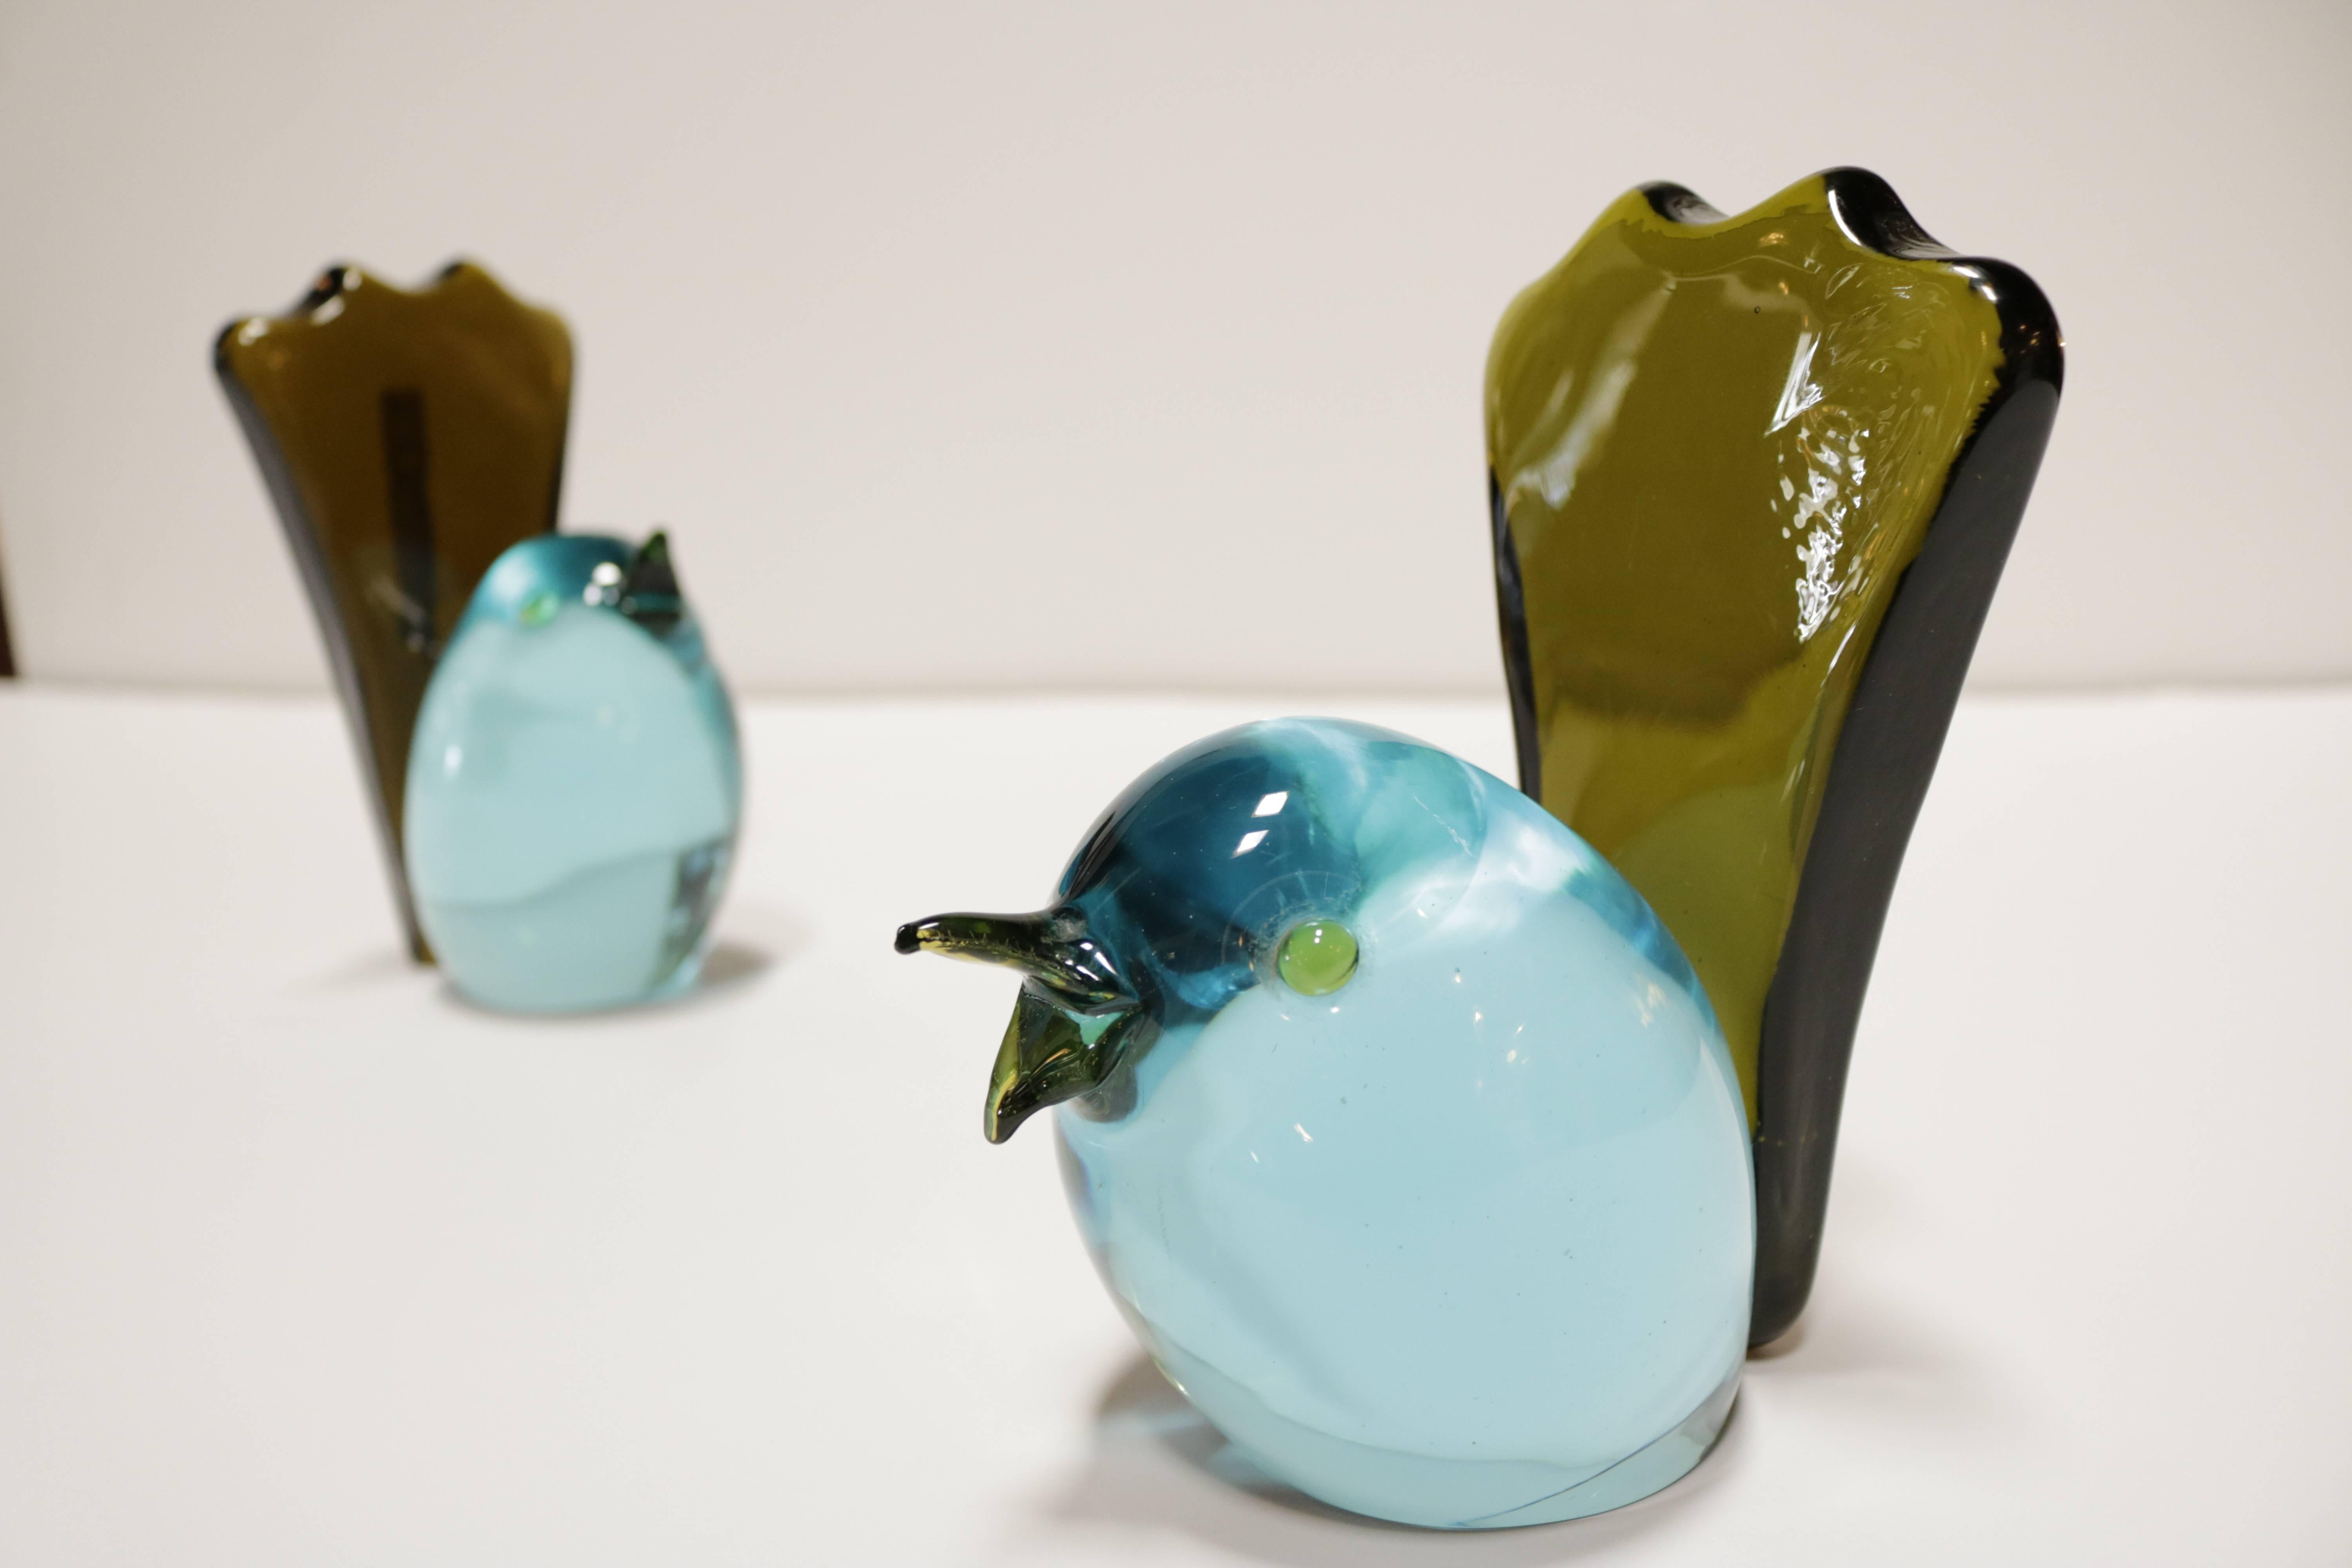 Italian Pair of Glass Chick Bookends by Salviati & Co.